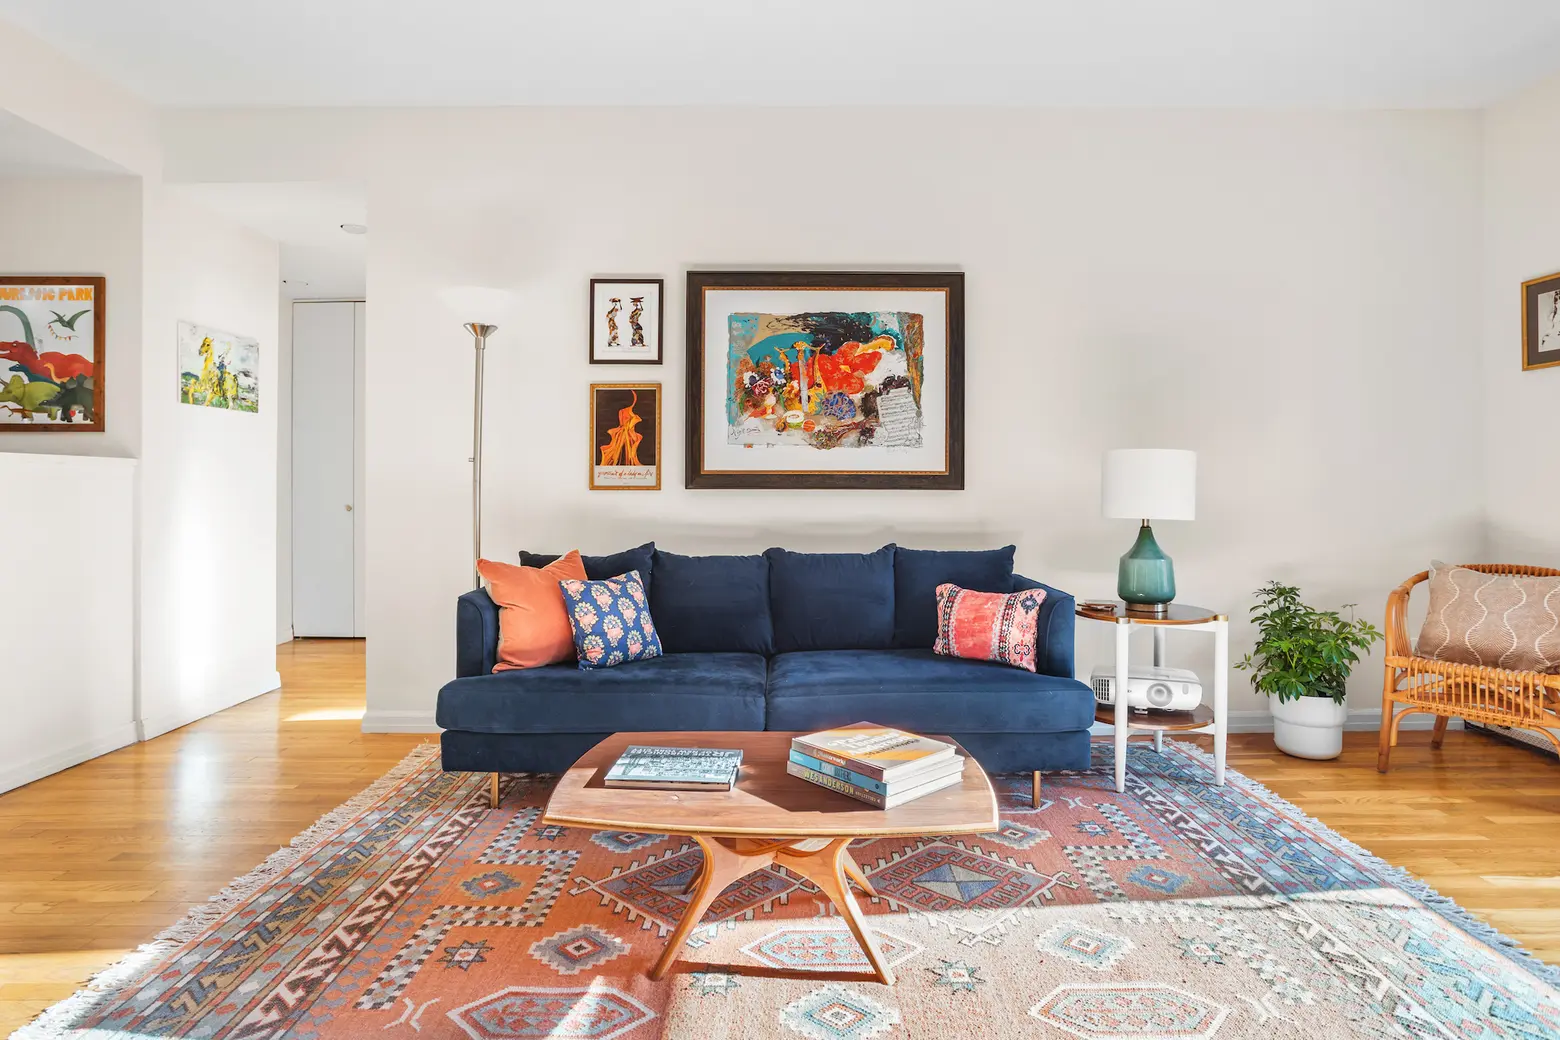 This $750K South Slope co-op is a sun-filled refuge with a roof deck and shared garden